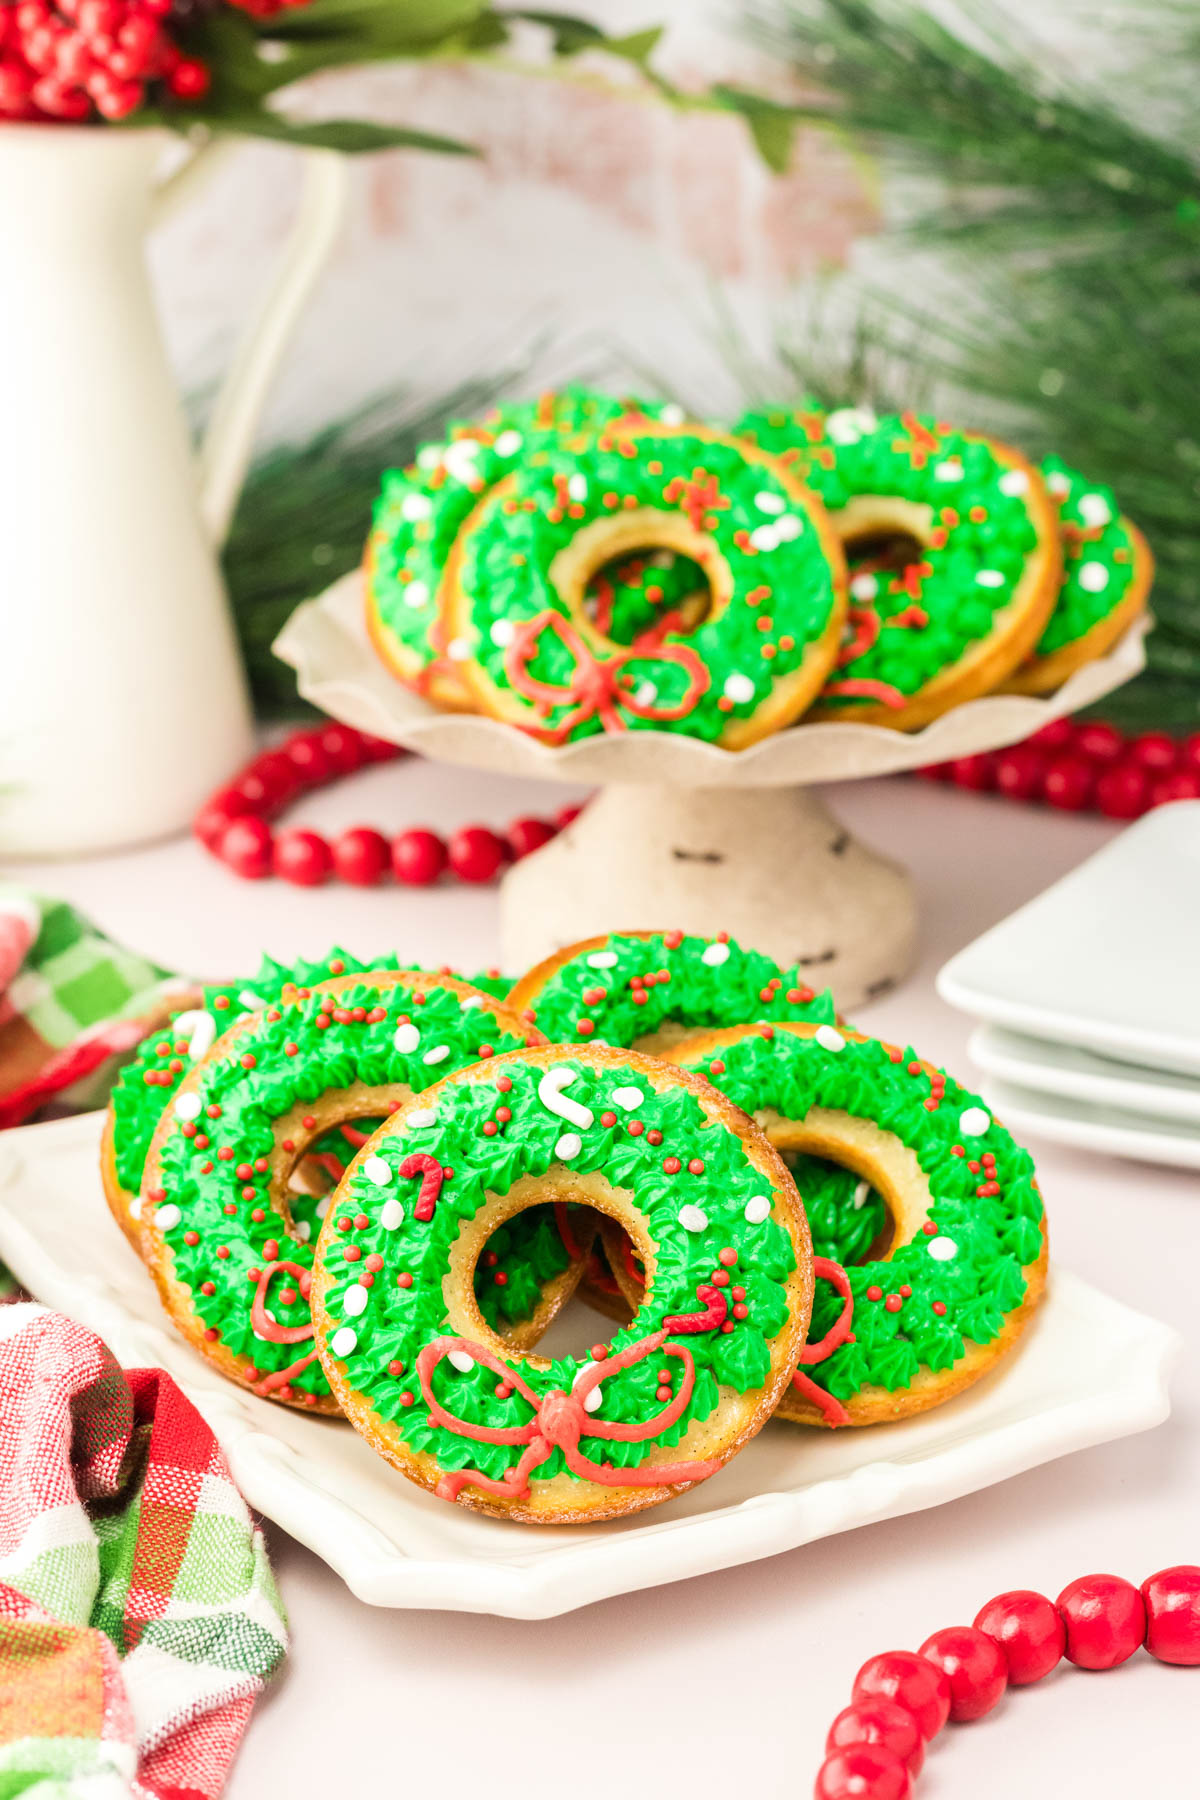 Donuts decorated with green and red icing on a white plate.